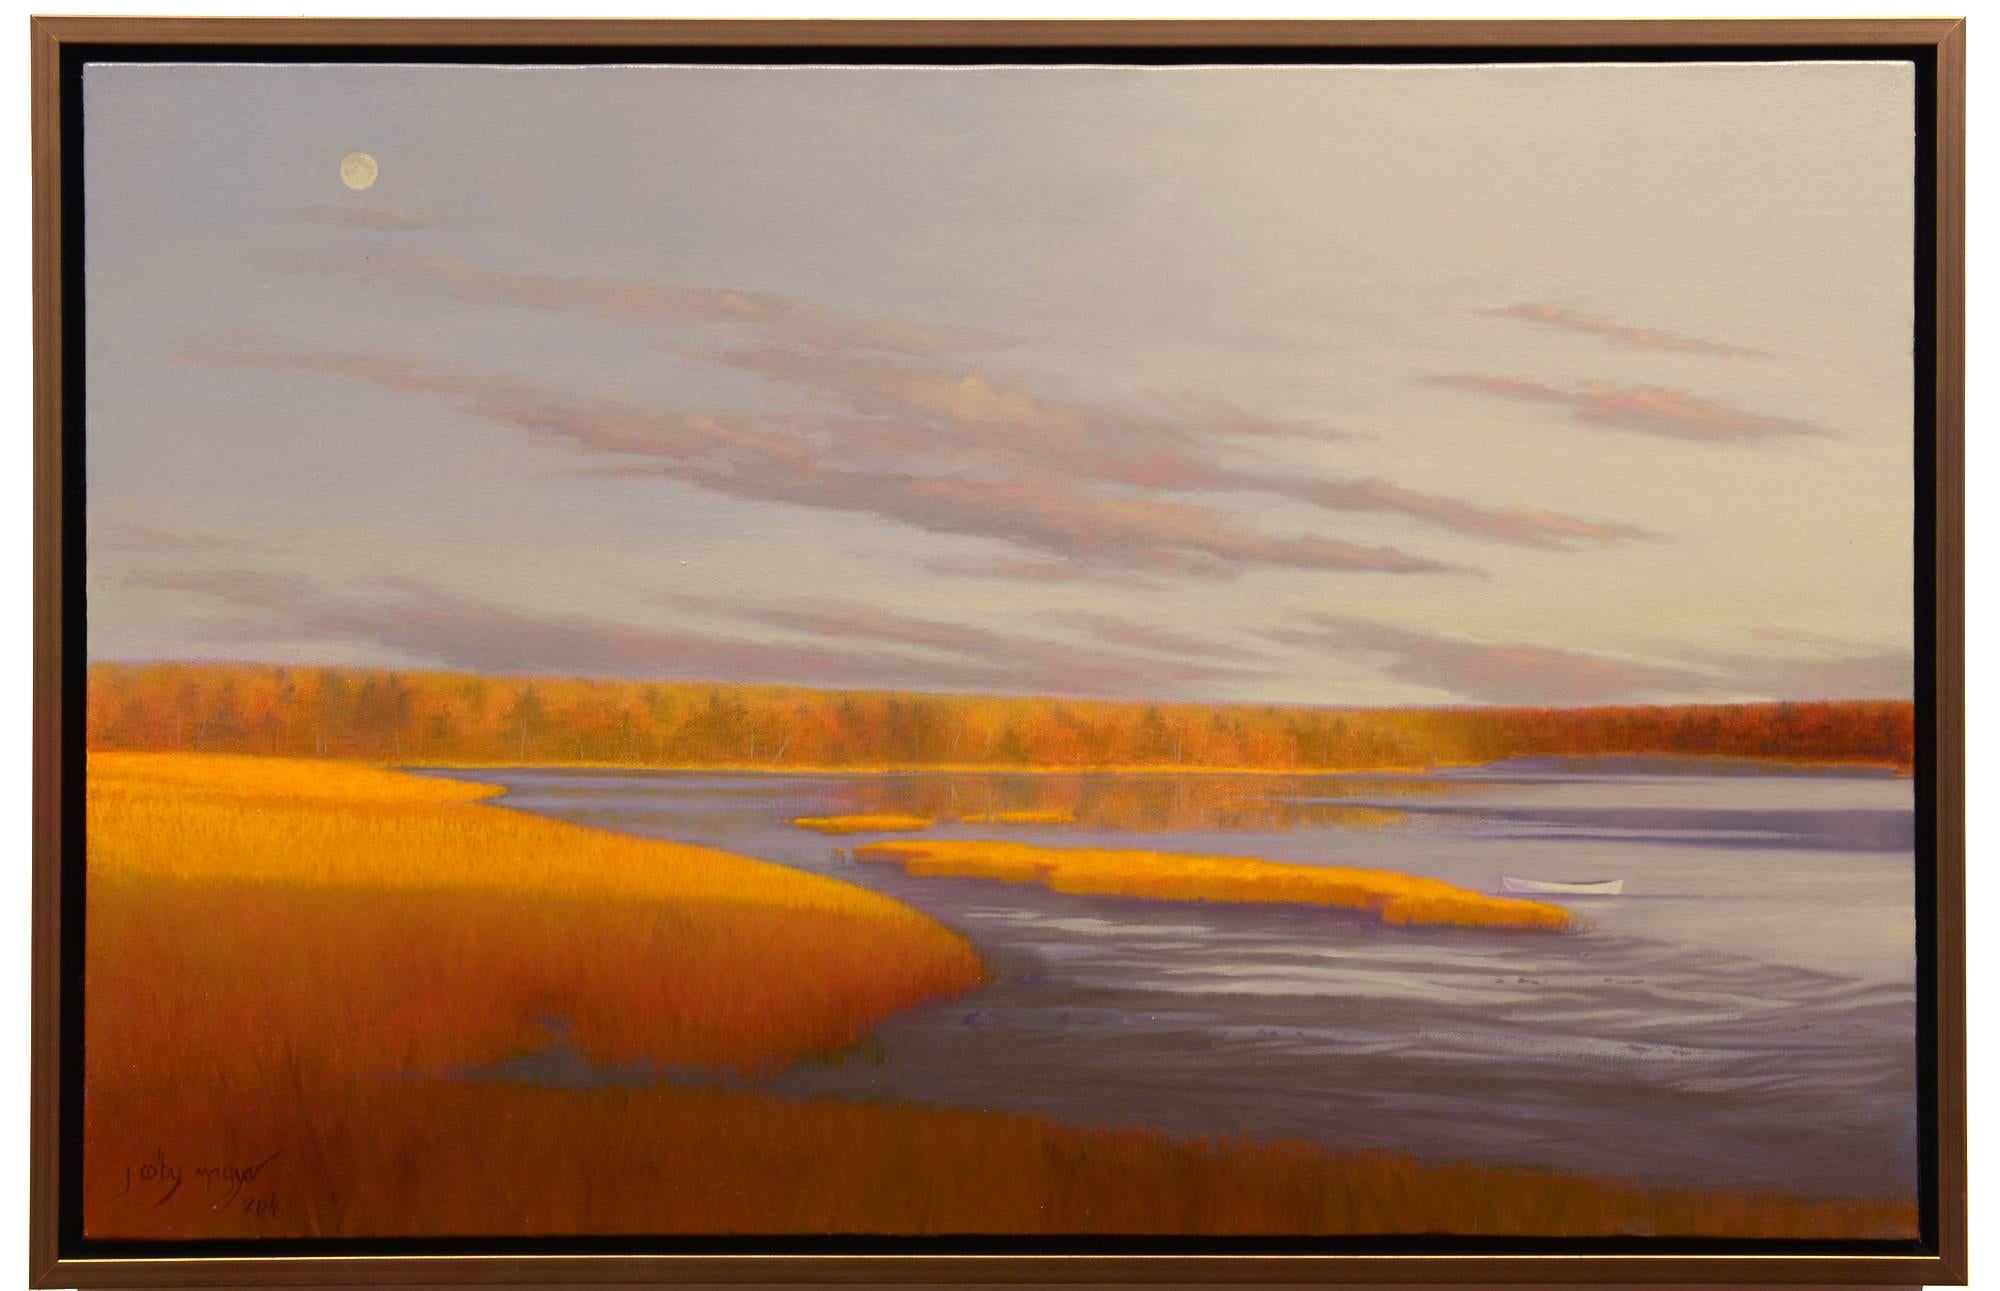 October Moonrise, Maquoit Bay - Painting by Judith Magyar